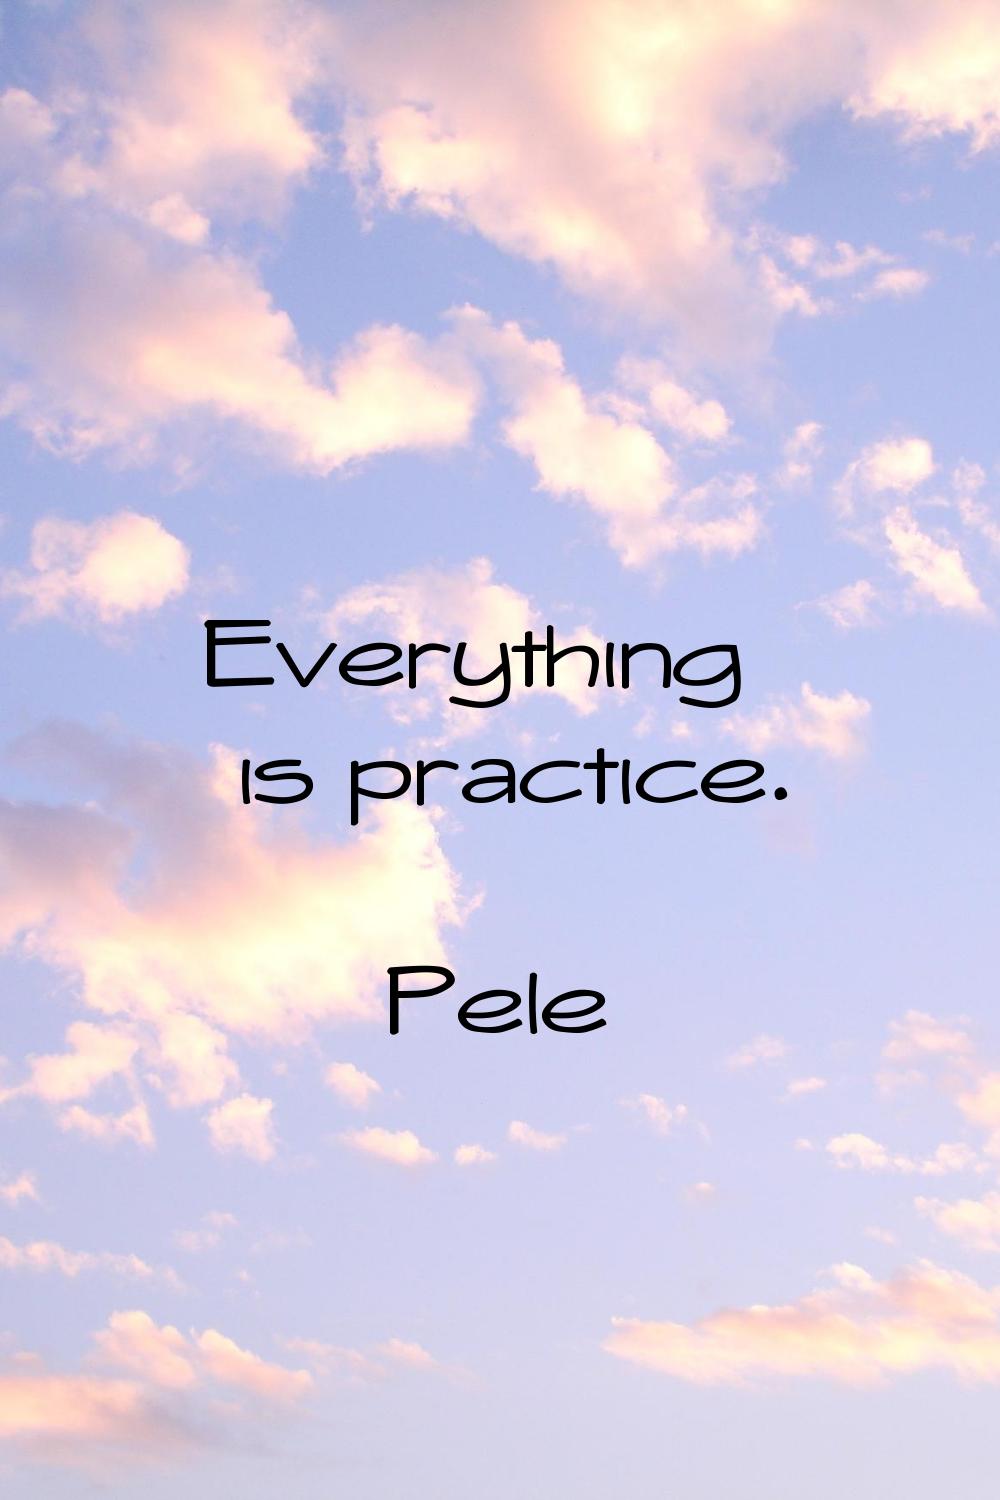 Everything is practice.